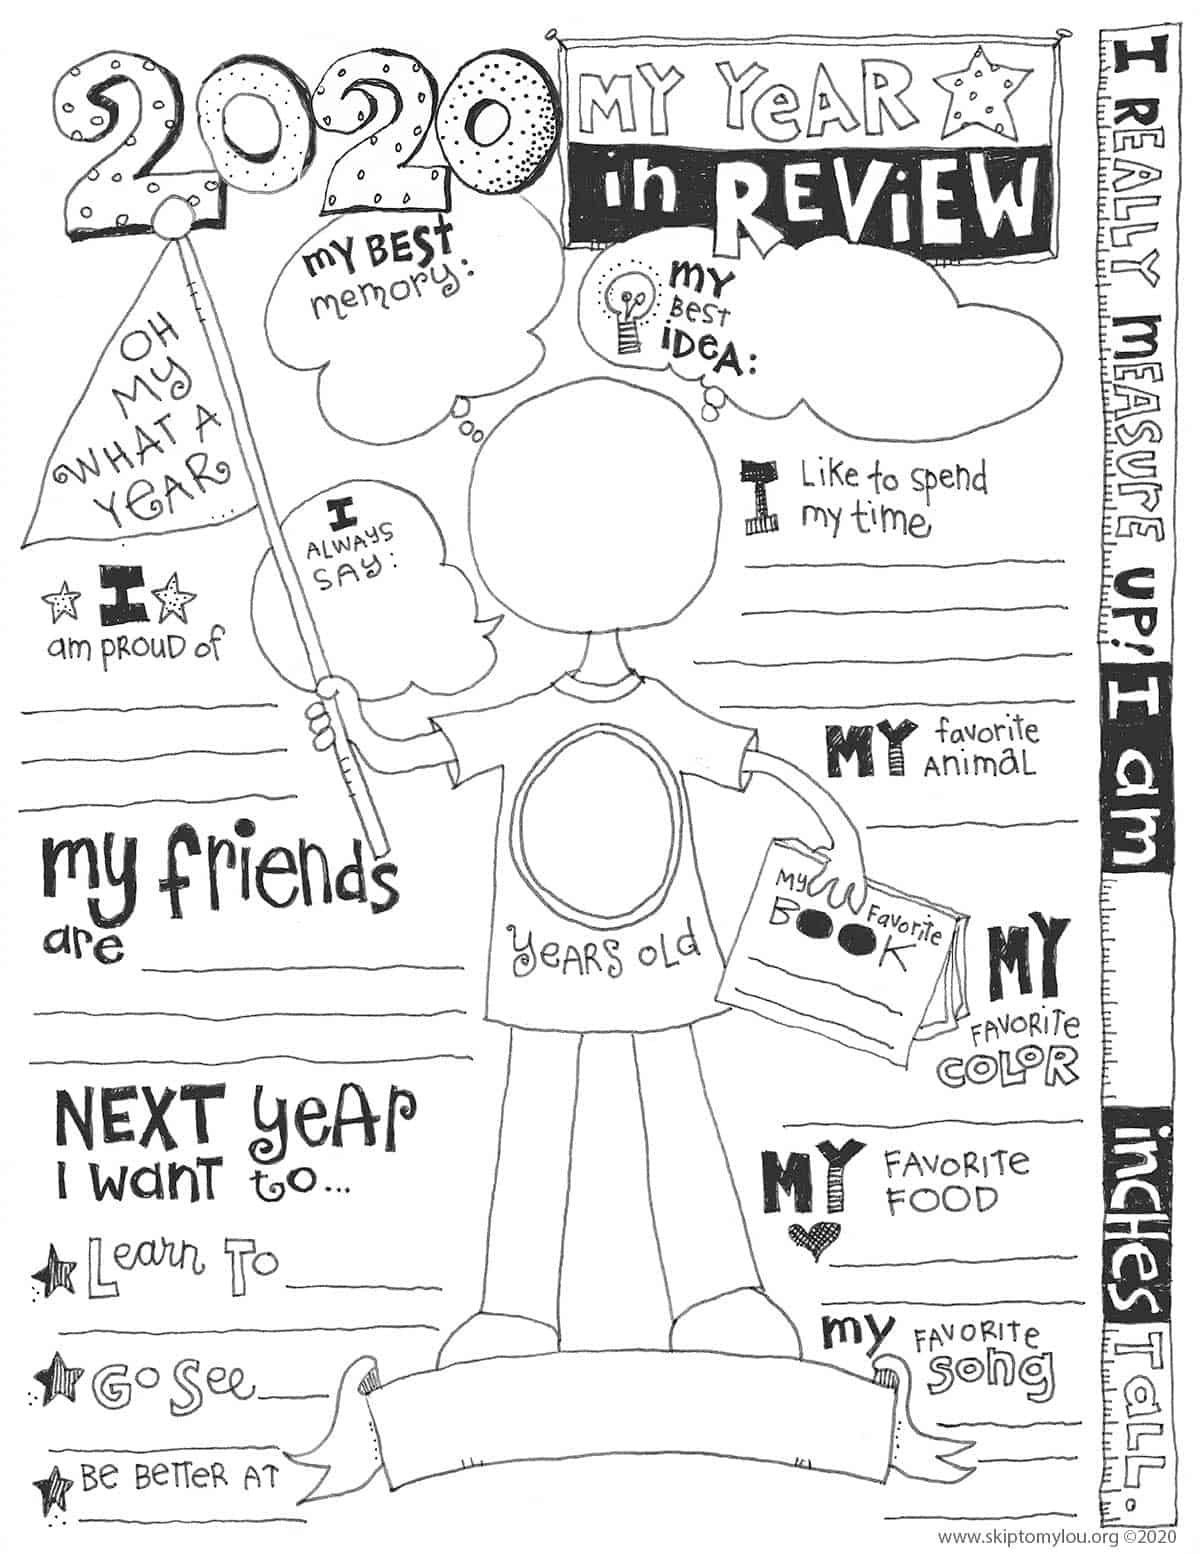 2020 My year in review free printable